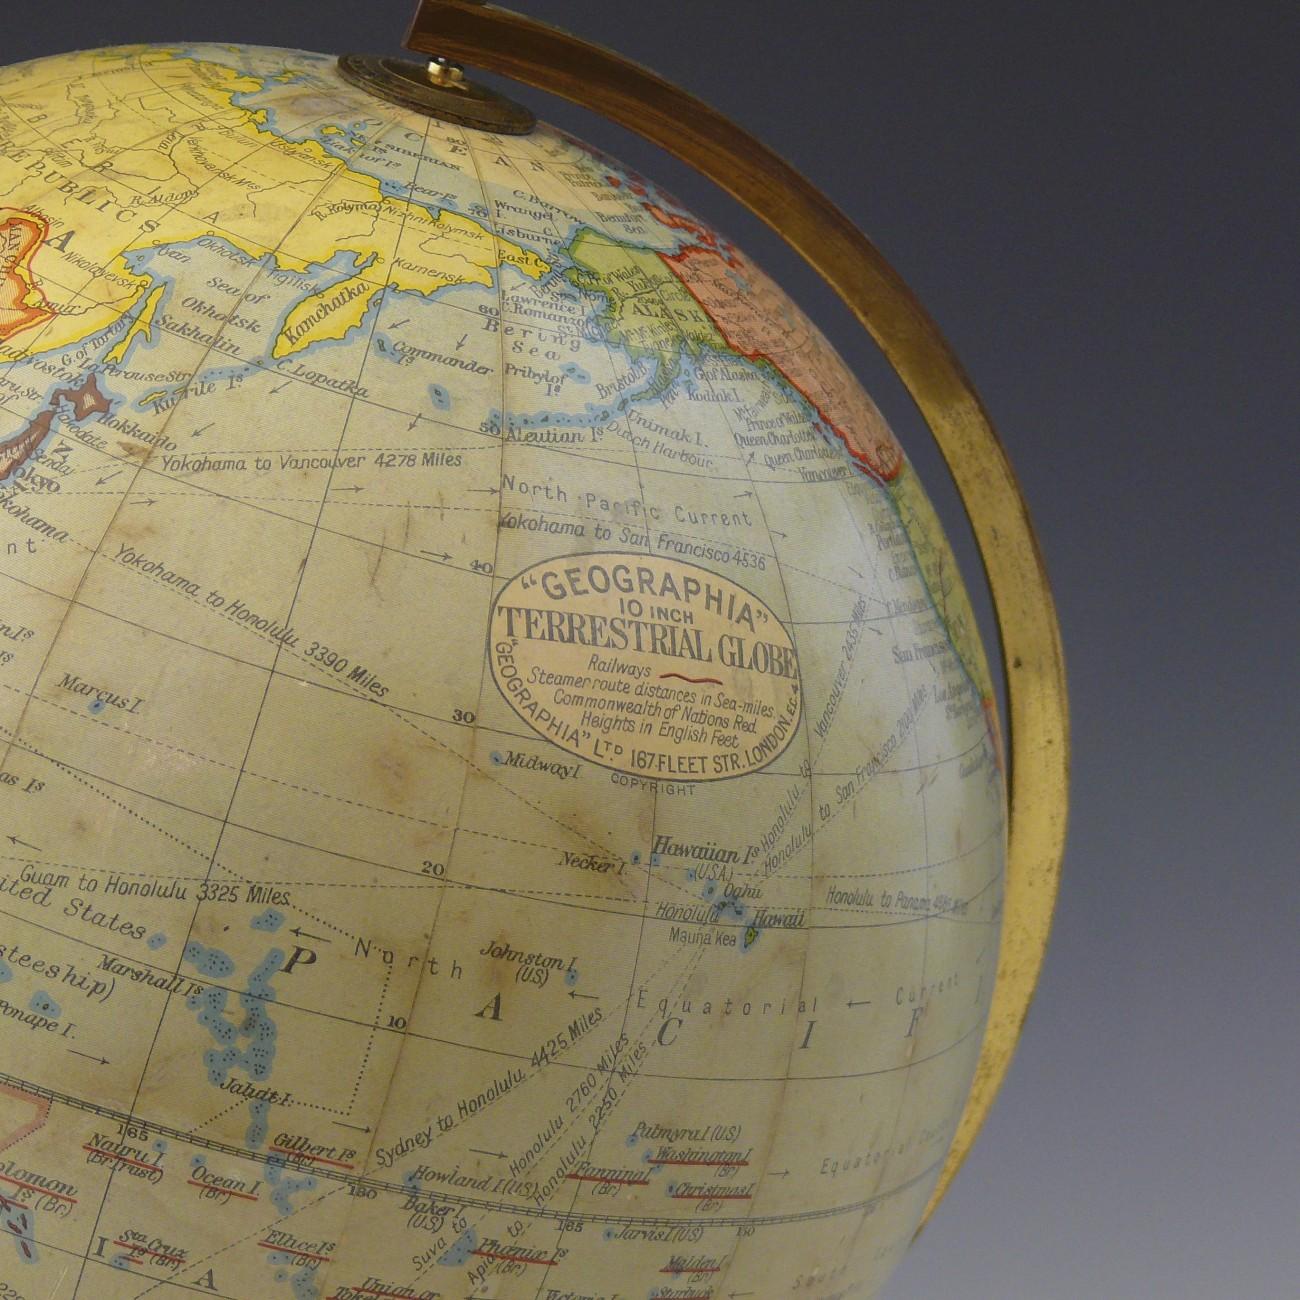 A fine 10 inch terrestrial globe by Geographia of Fleet Street London. With brass semi-meridian on a circular Bakelite base, circa 1950.

Dimensions: 25.5 cm/10 inches (diameter) x 35.5 cm/14 inches (height)

Bentleys are Members of LAPADA, the